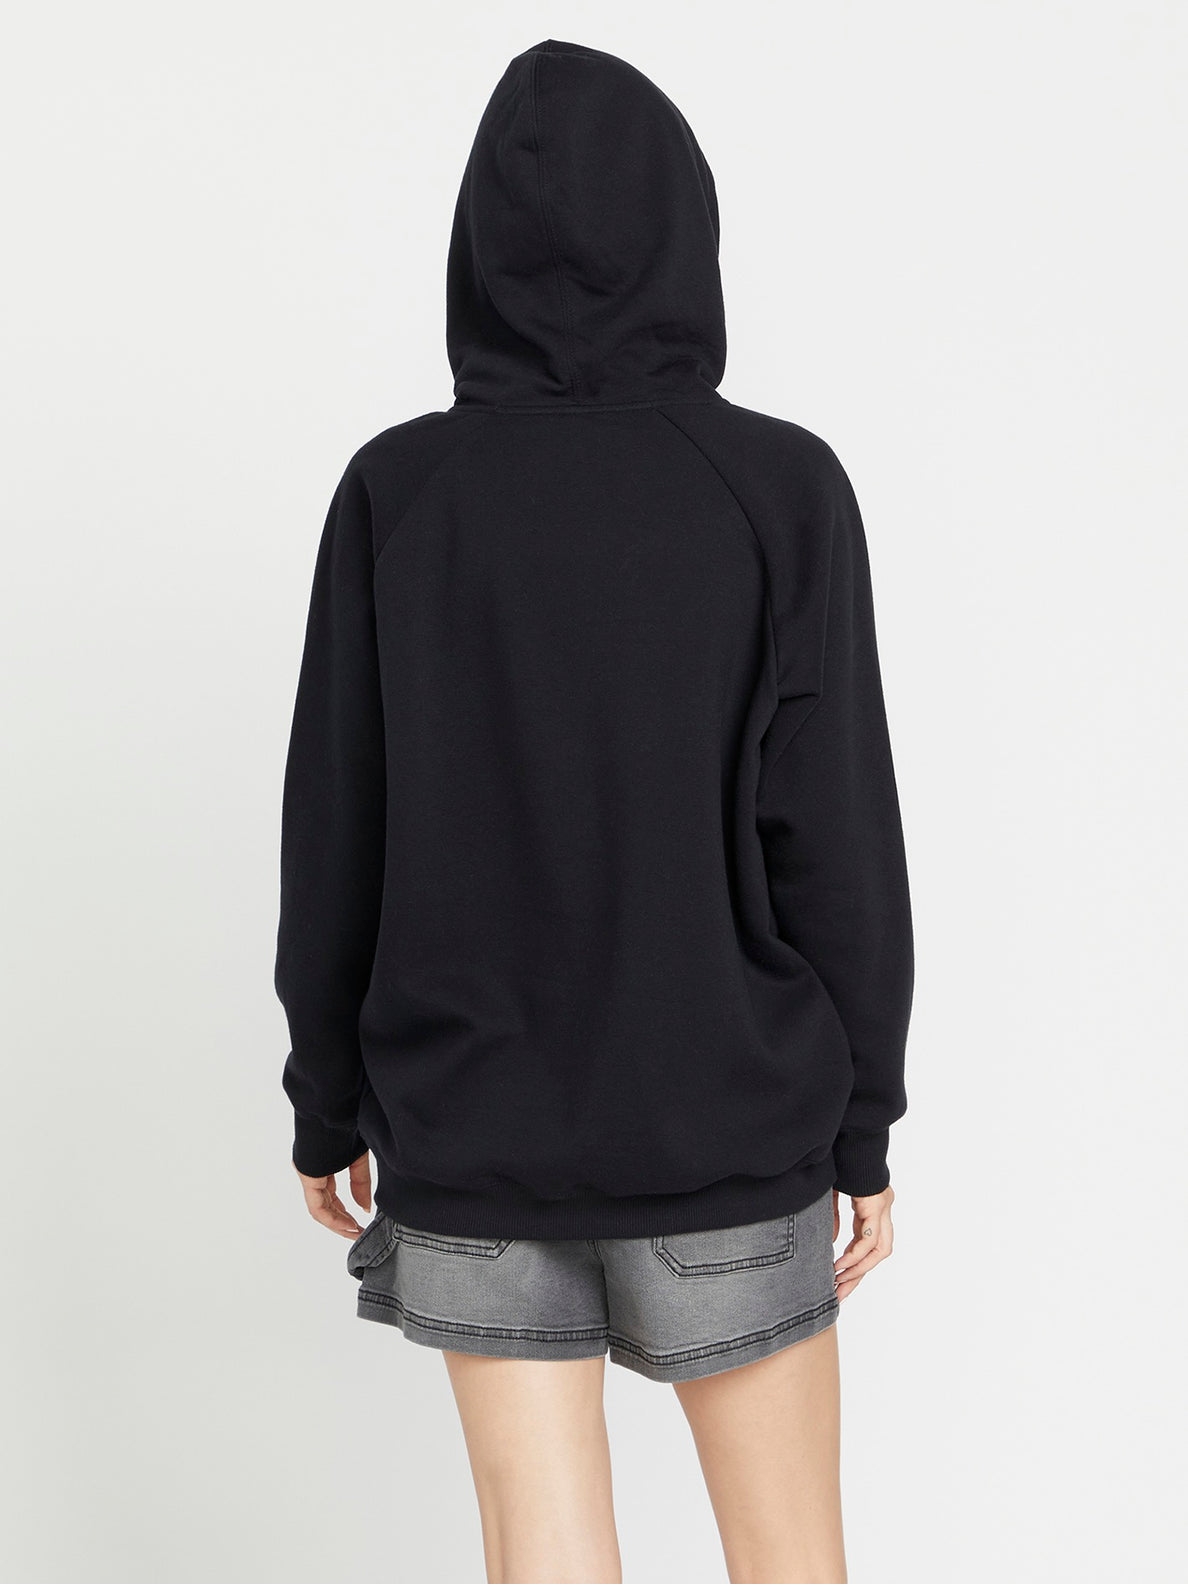 Truly Stoked Bf Pullover - Black